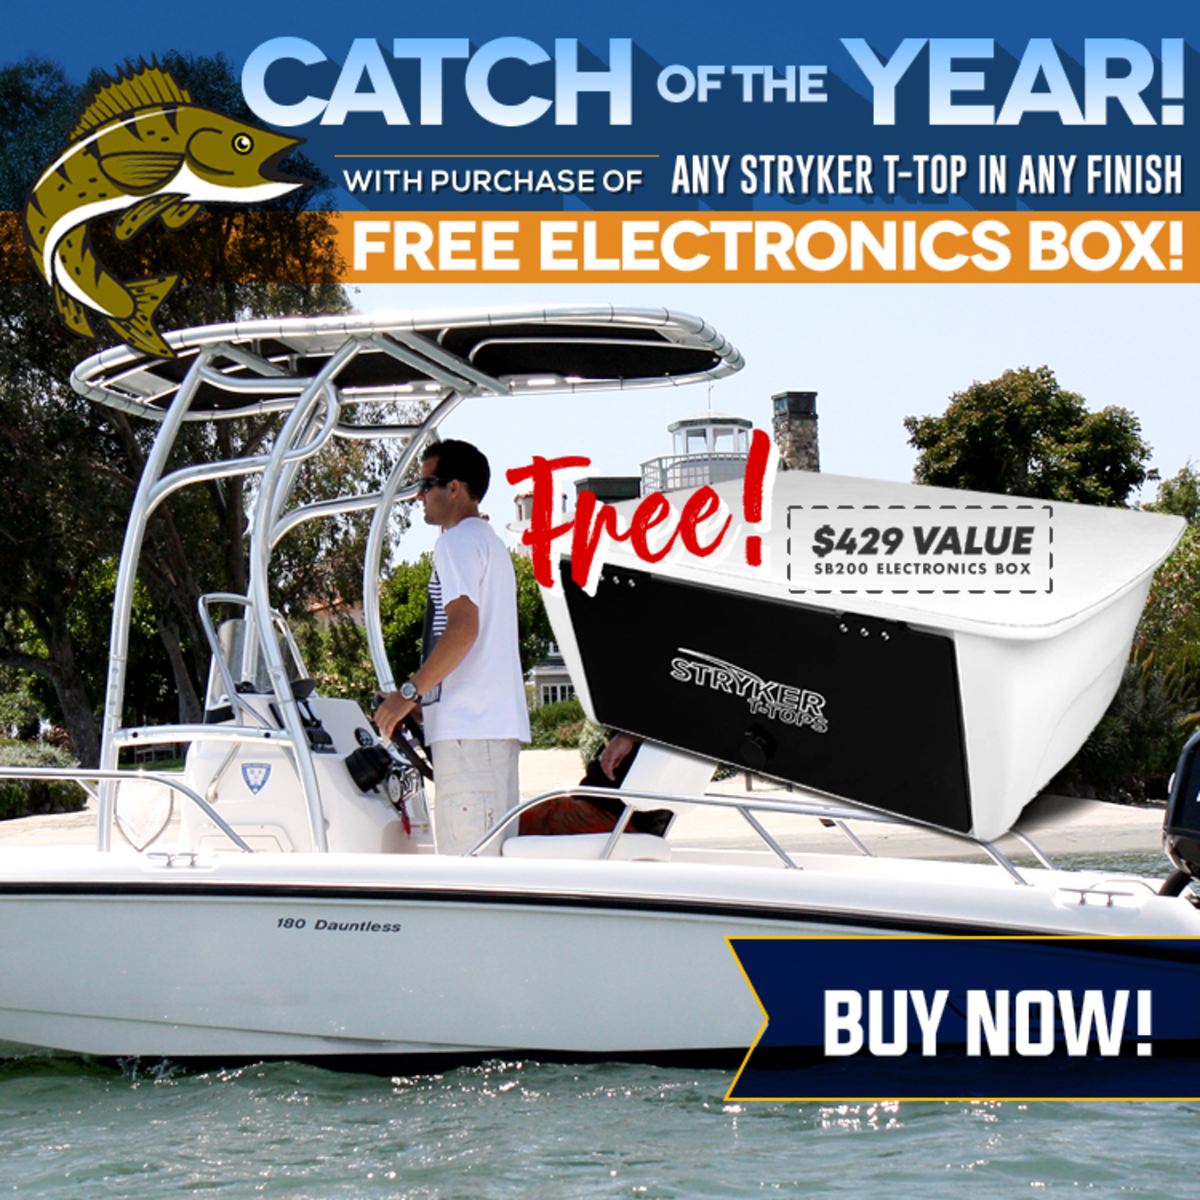 Stryker T-Tops: Big Sale on Boat & T-Top Accessories at Stryker